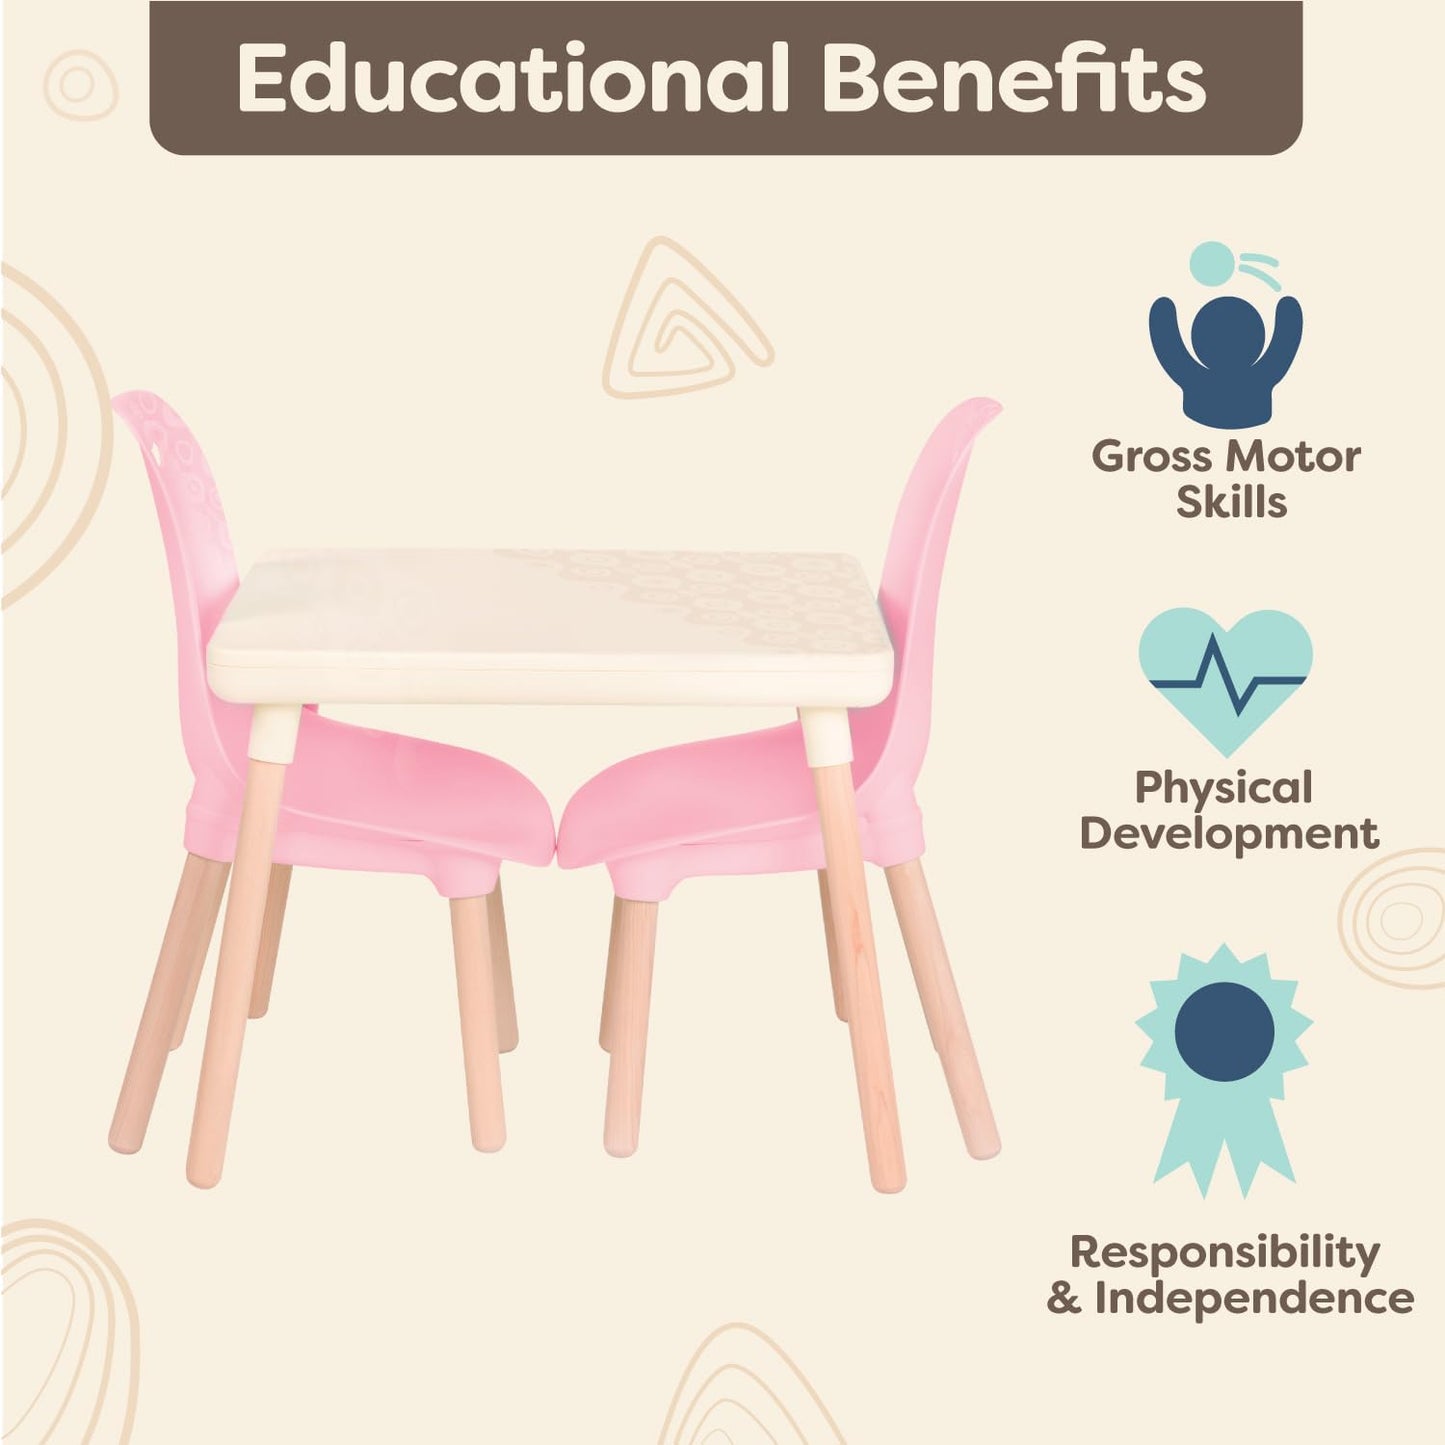 IVORY TABLE & PINK CHAIR SET